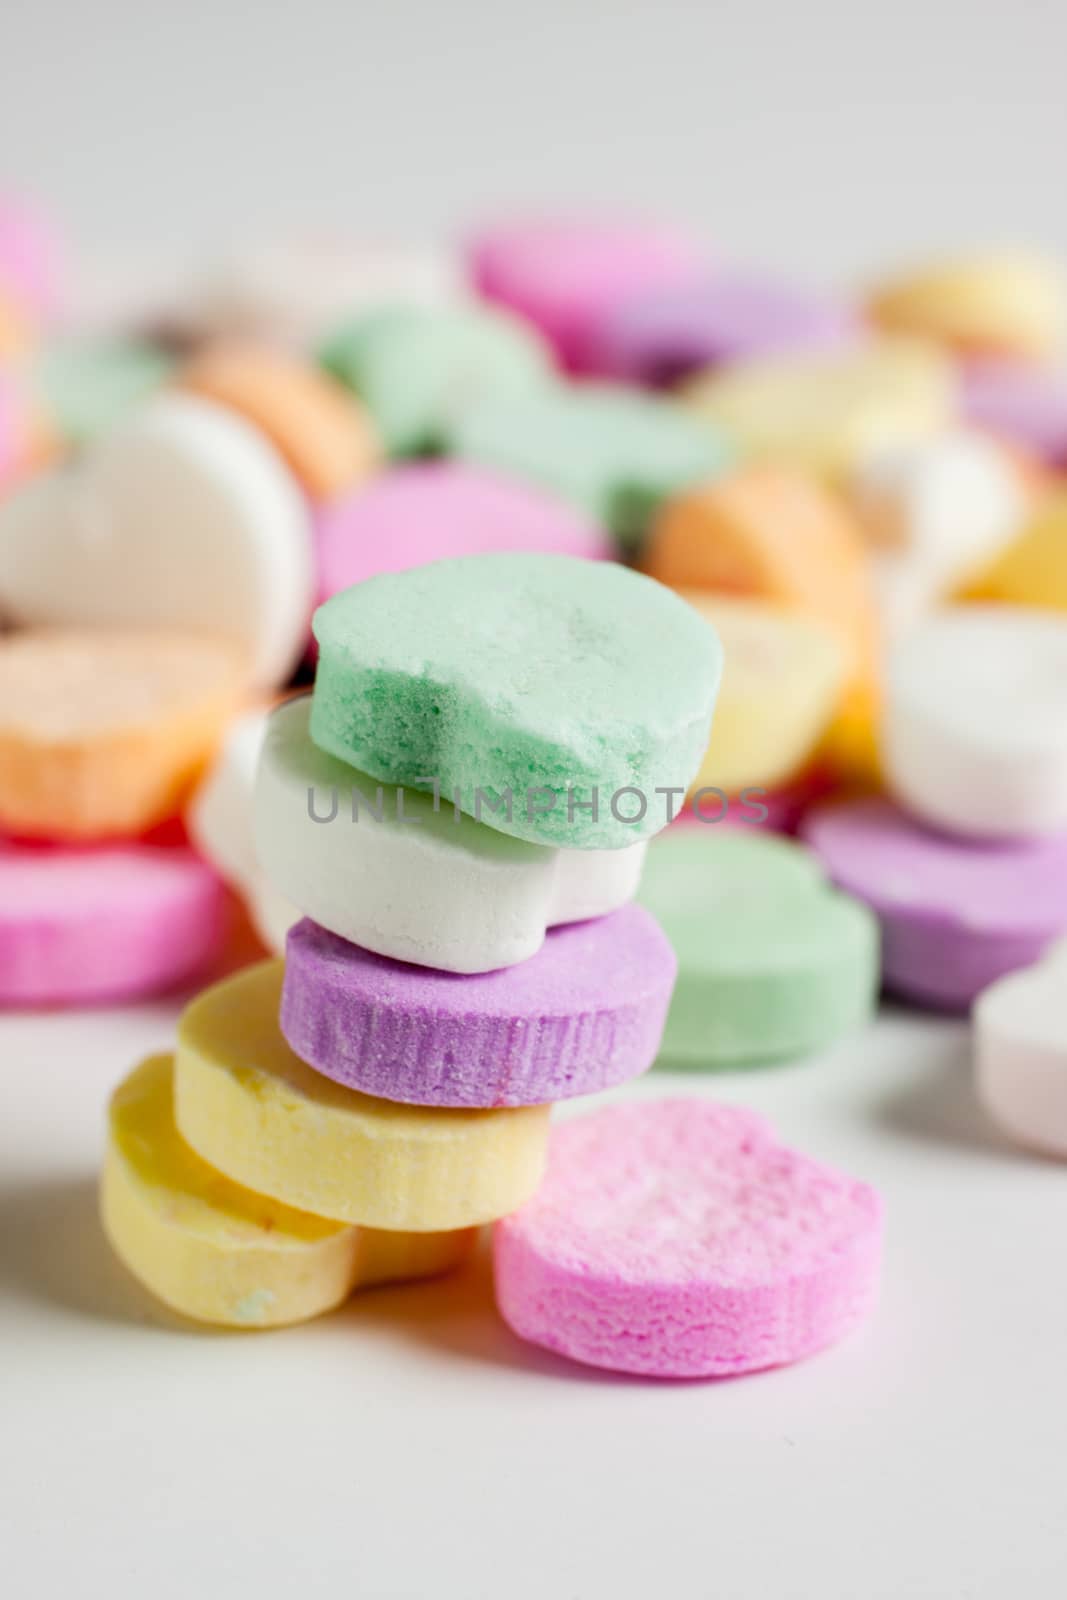 Pastel colored candy hearts in a pile on a white surface.